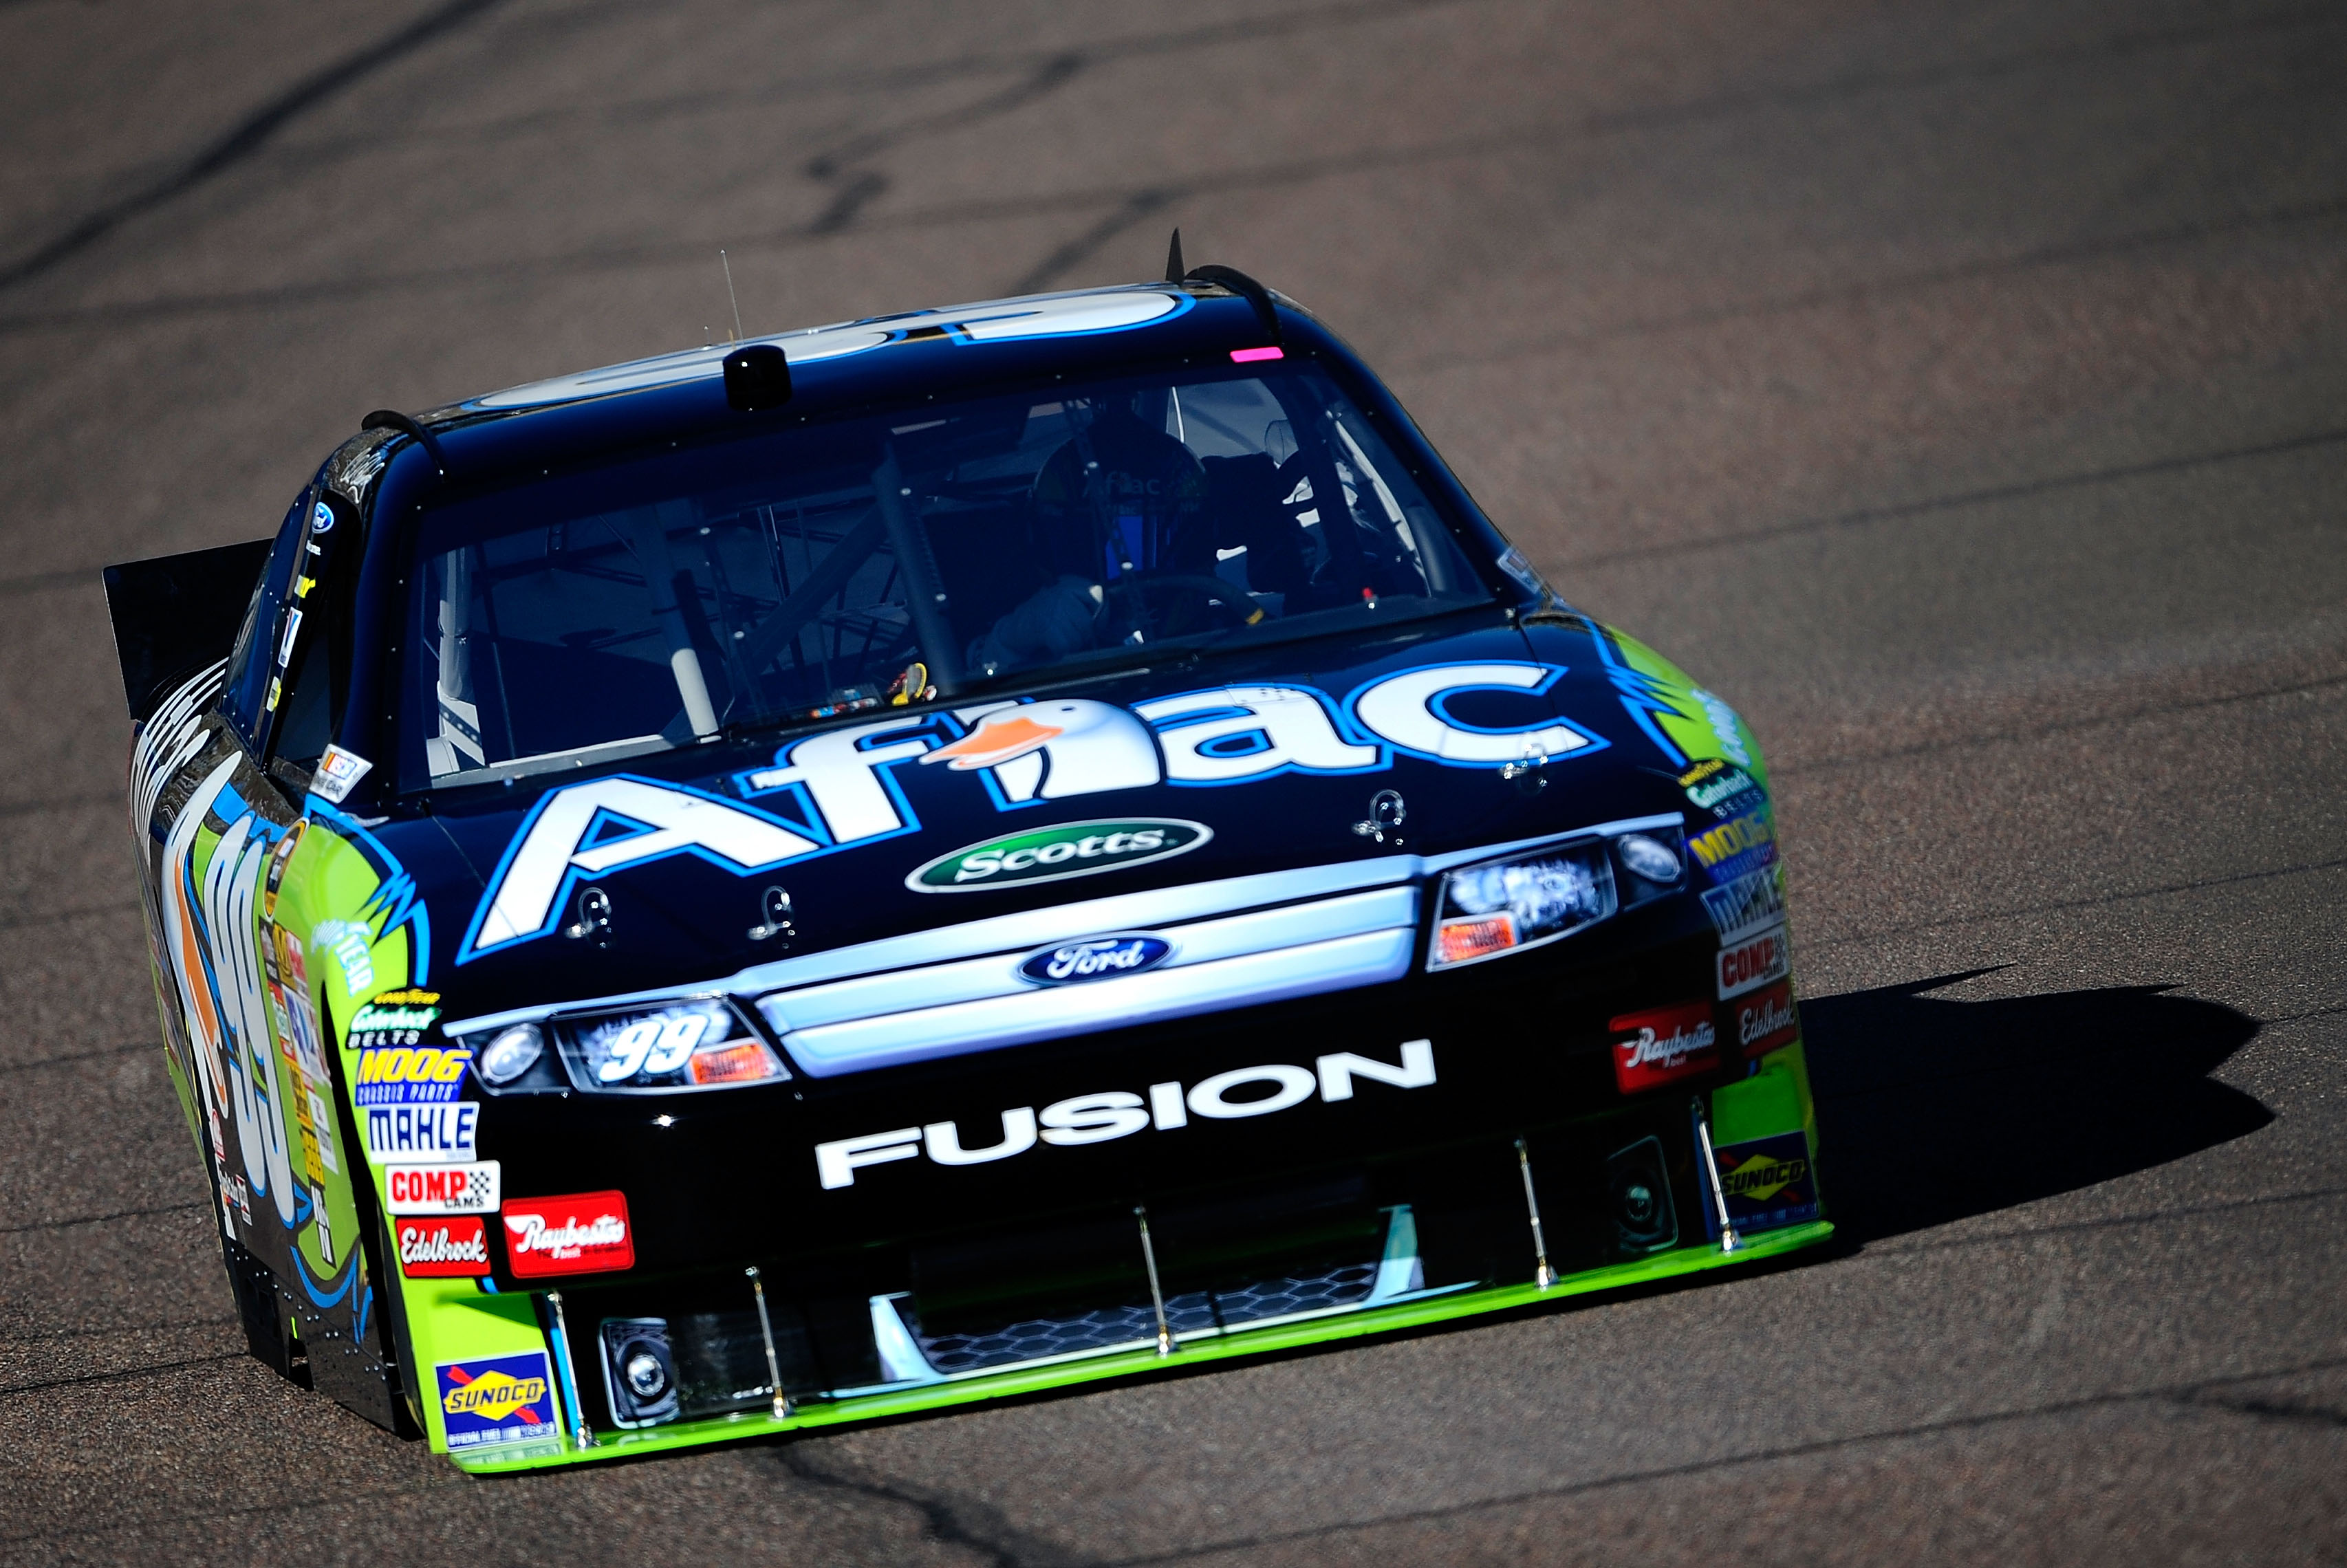 AVONDALE, AZ - NOVEMBER 12:  Carl Edwards, driver of the #99 Aflac Ford, practices for the NASCAR Sprint Cup Series Kobalt Tools 500 at Phoenix International Raceway on November 12, 2010 in Avondale, Arizona.  (Photo by Rusty Jarrett/Getty Images for NASC